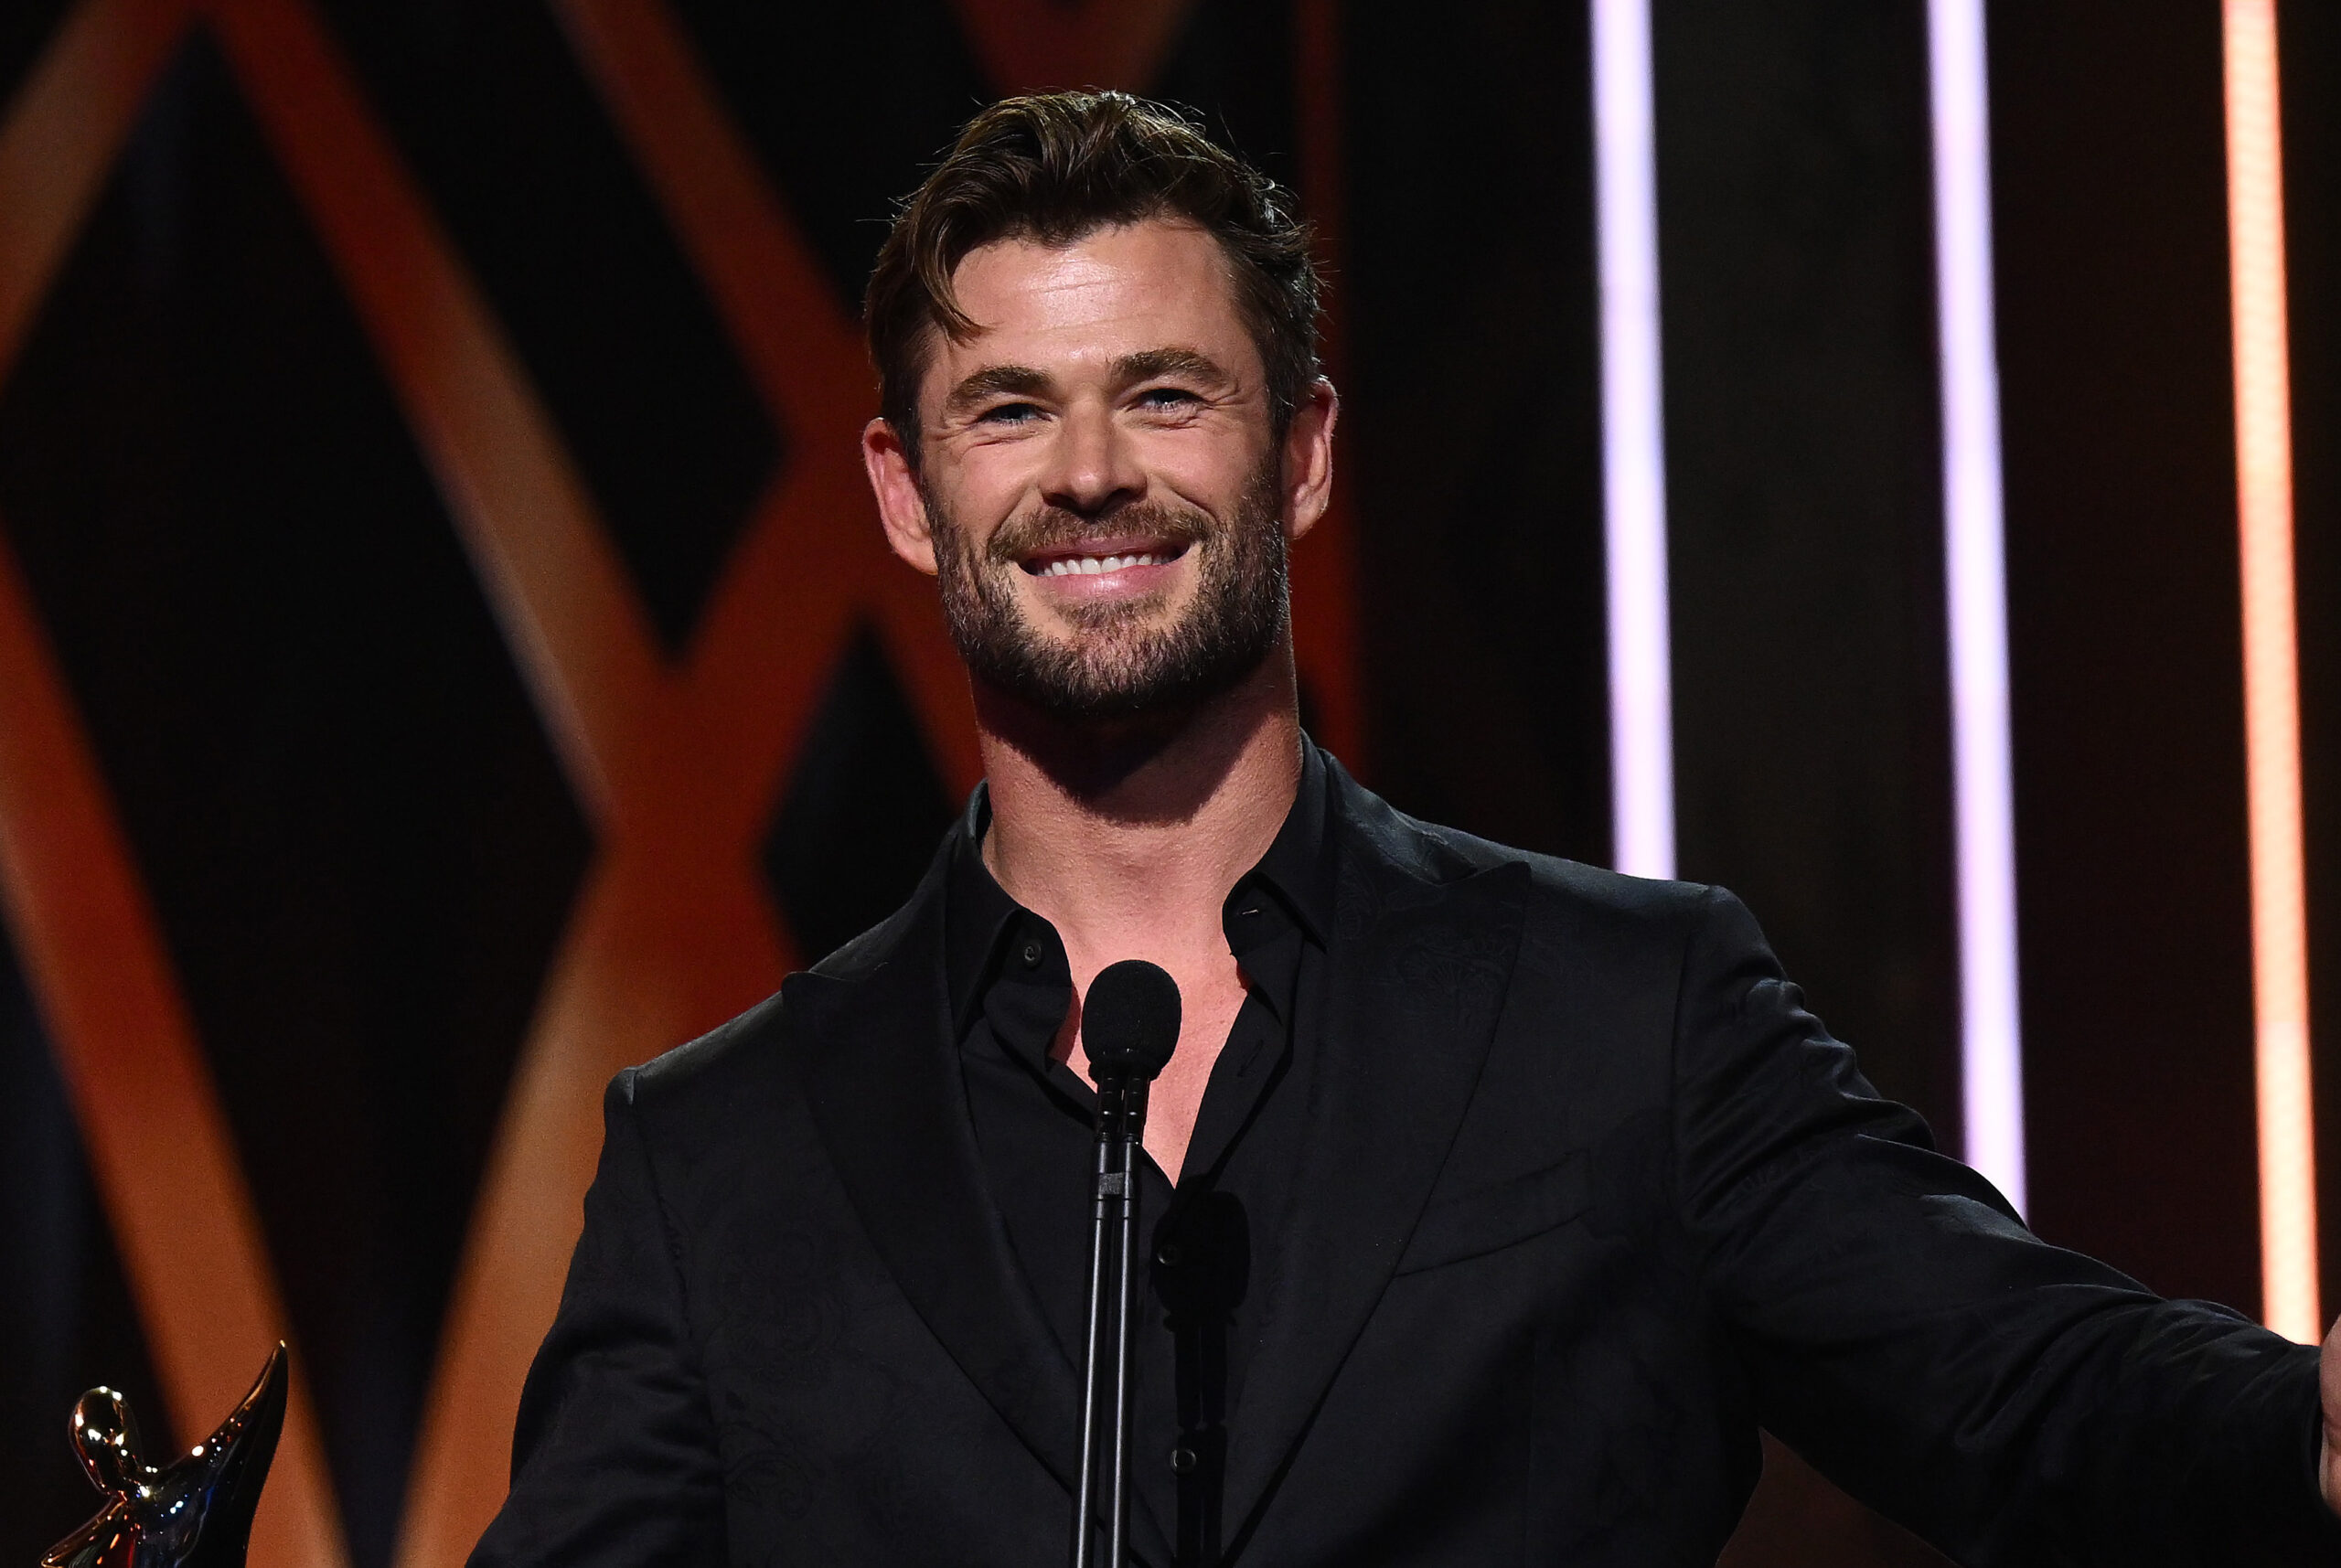 Chris Hemsworth clarifies break from Hollywood comments.